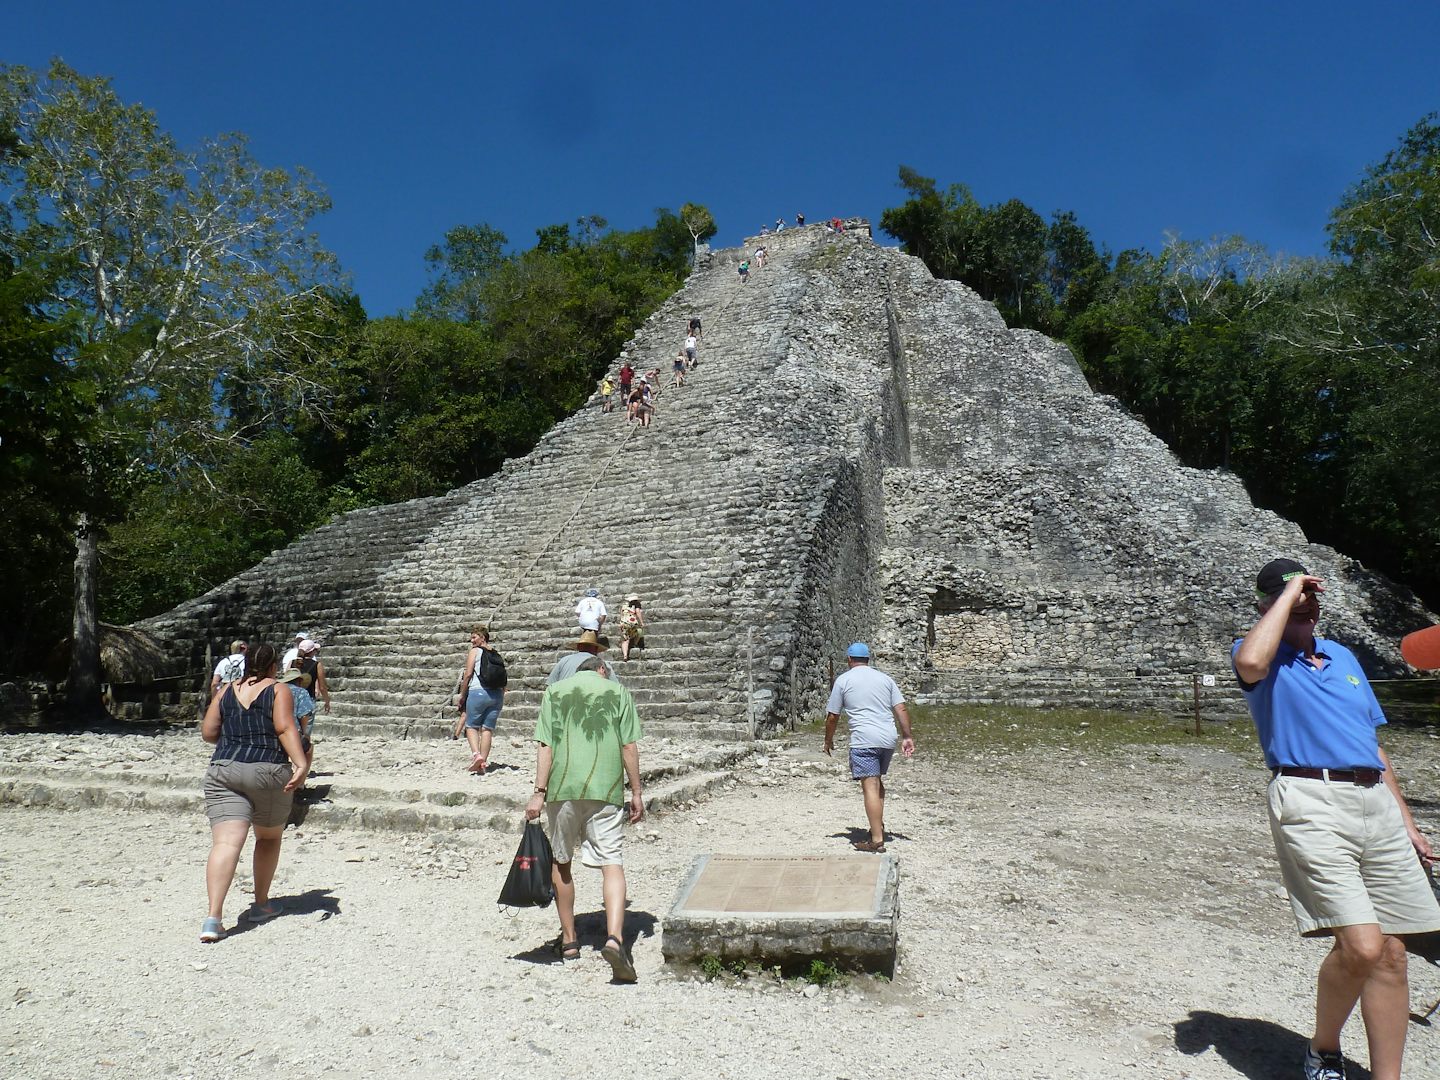 Shore excursion to Coba, climbing a Mayan ruin from the year 800. A real thrill